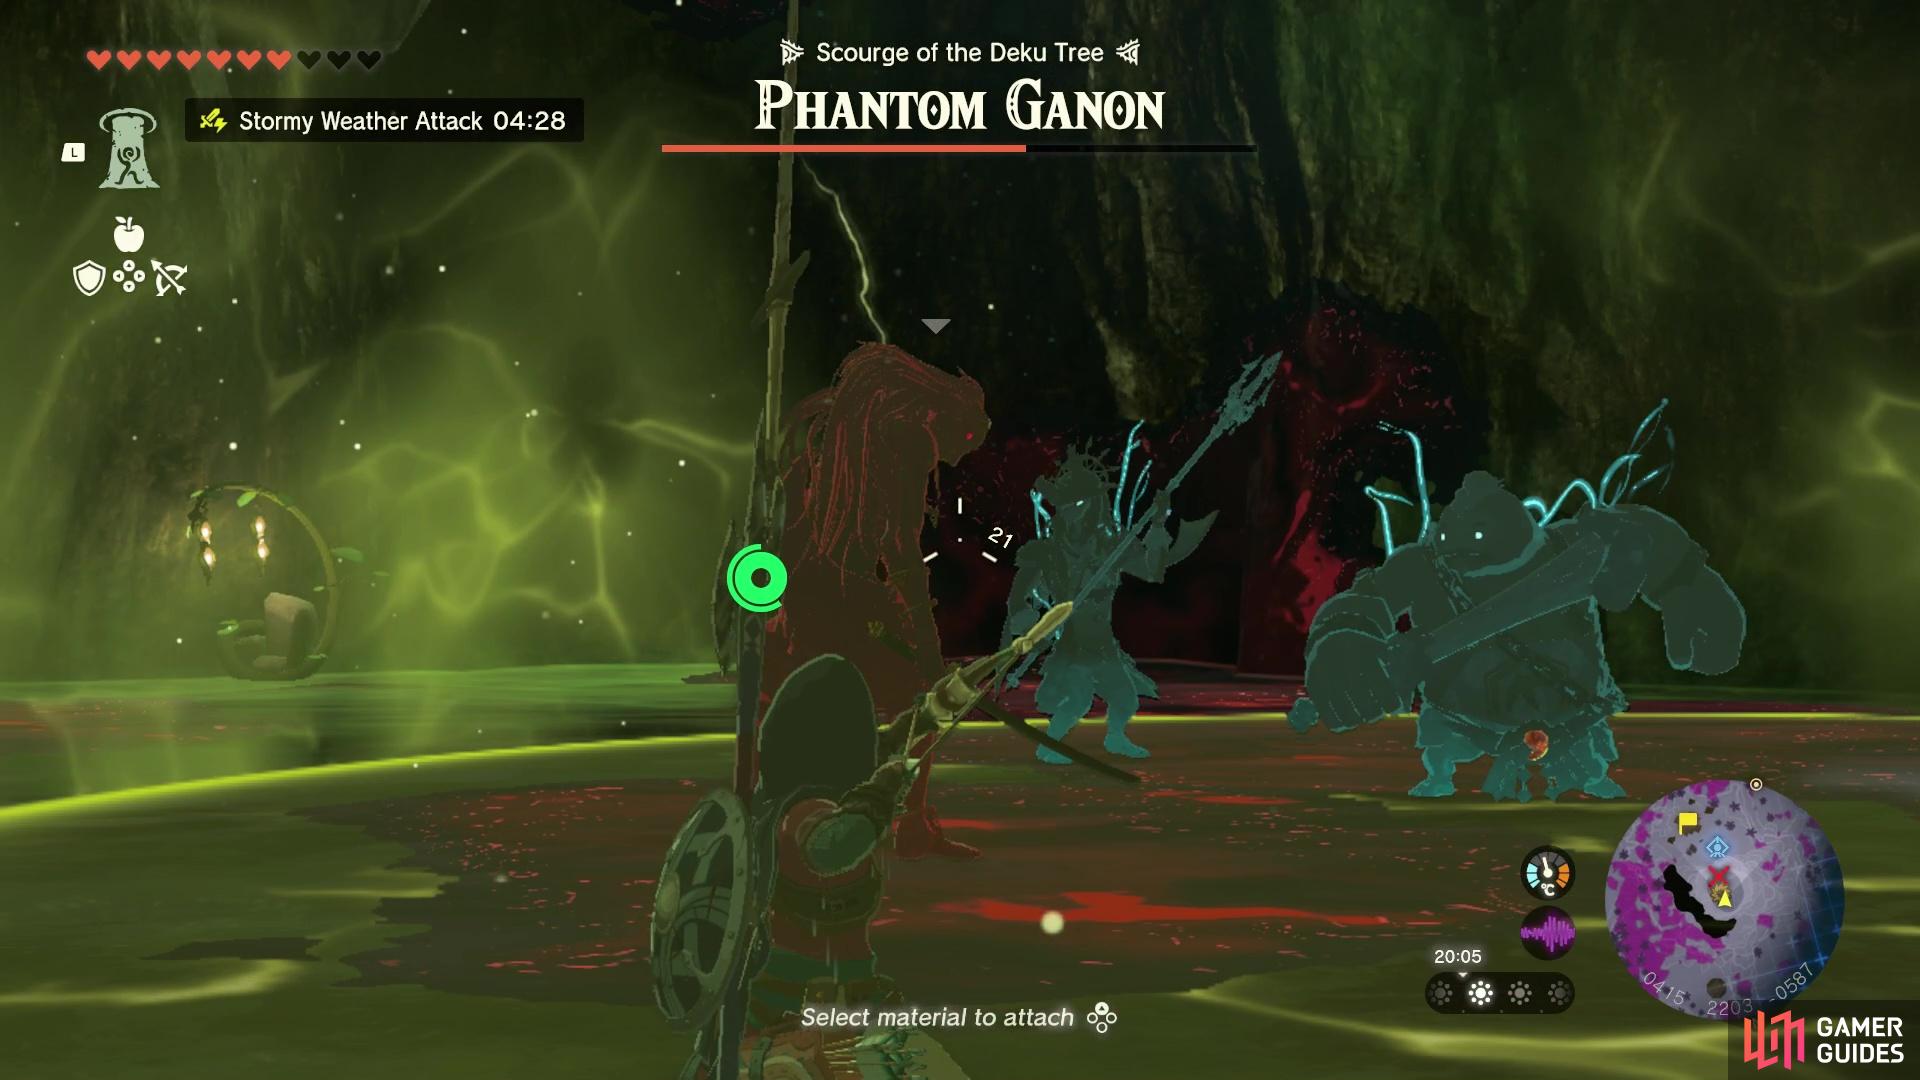 Try to keep out of close combat as the Phantom Ganon has a strong weapon!